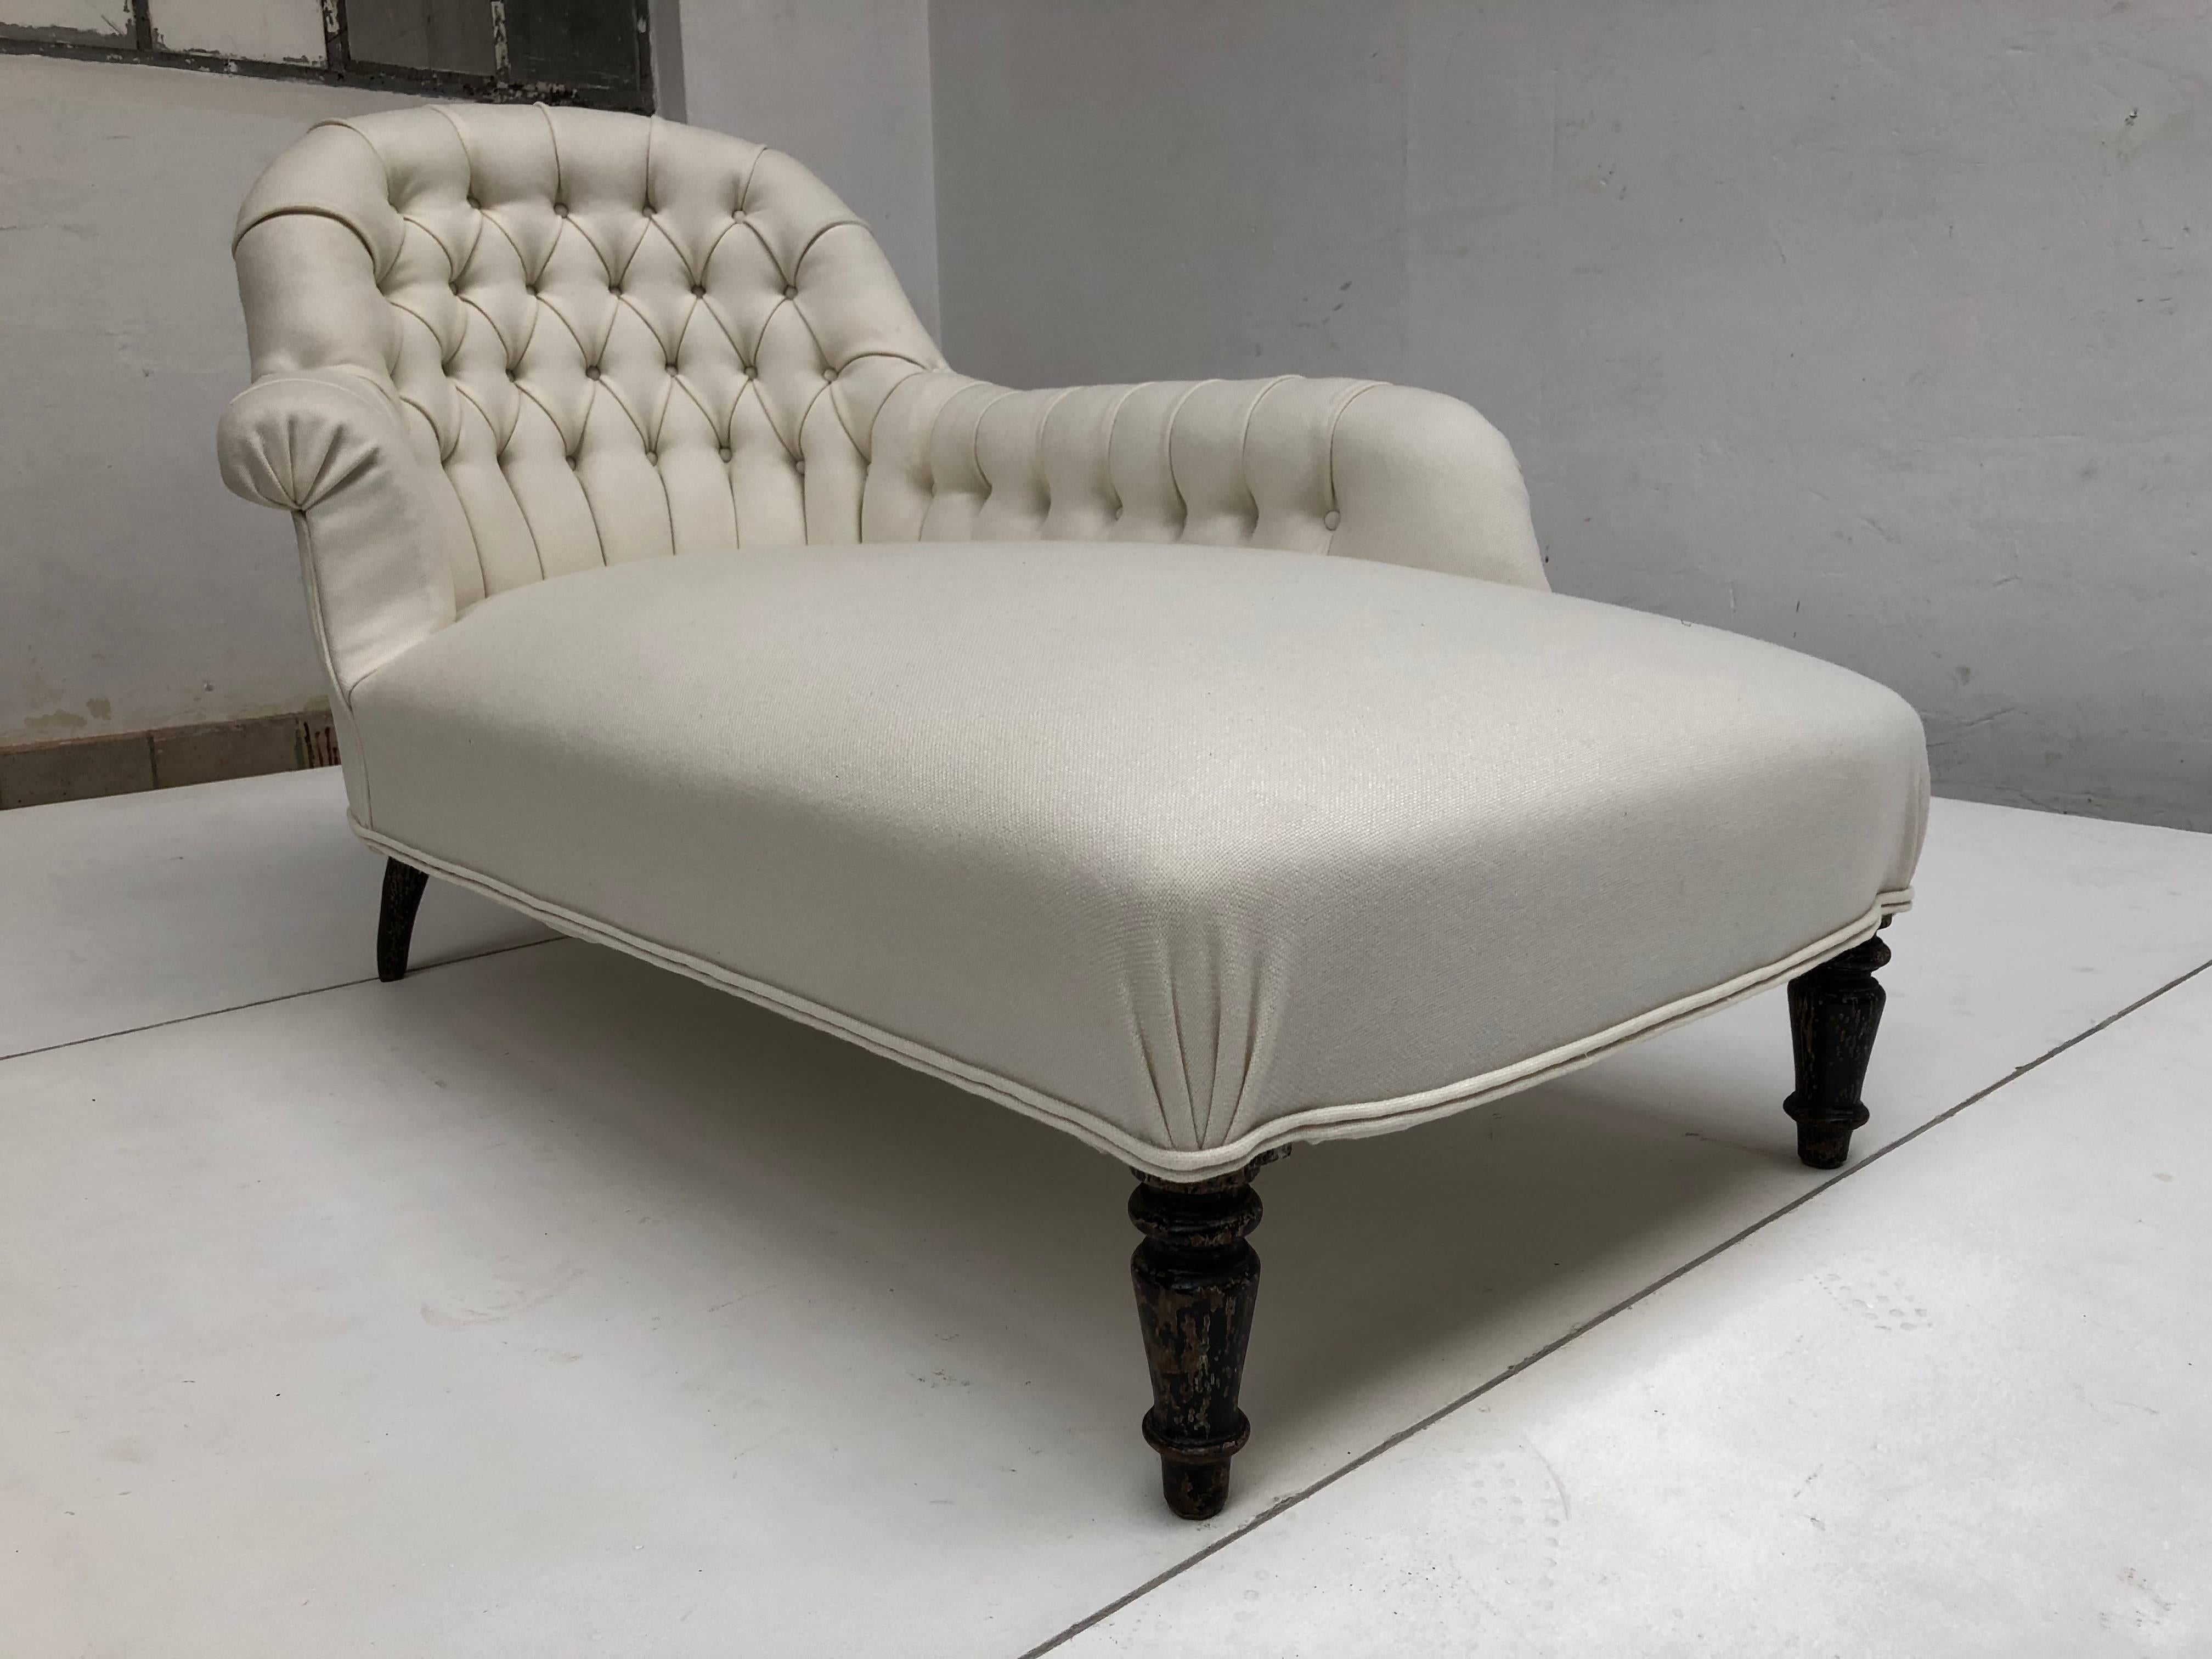 French Méridienne / Chaise Longue circa 1850 Re-Upholstered in De Ploeg Wool 2